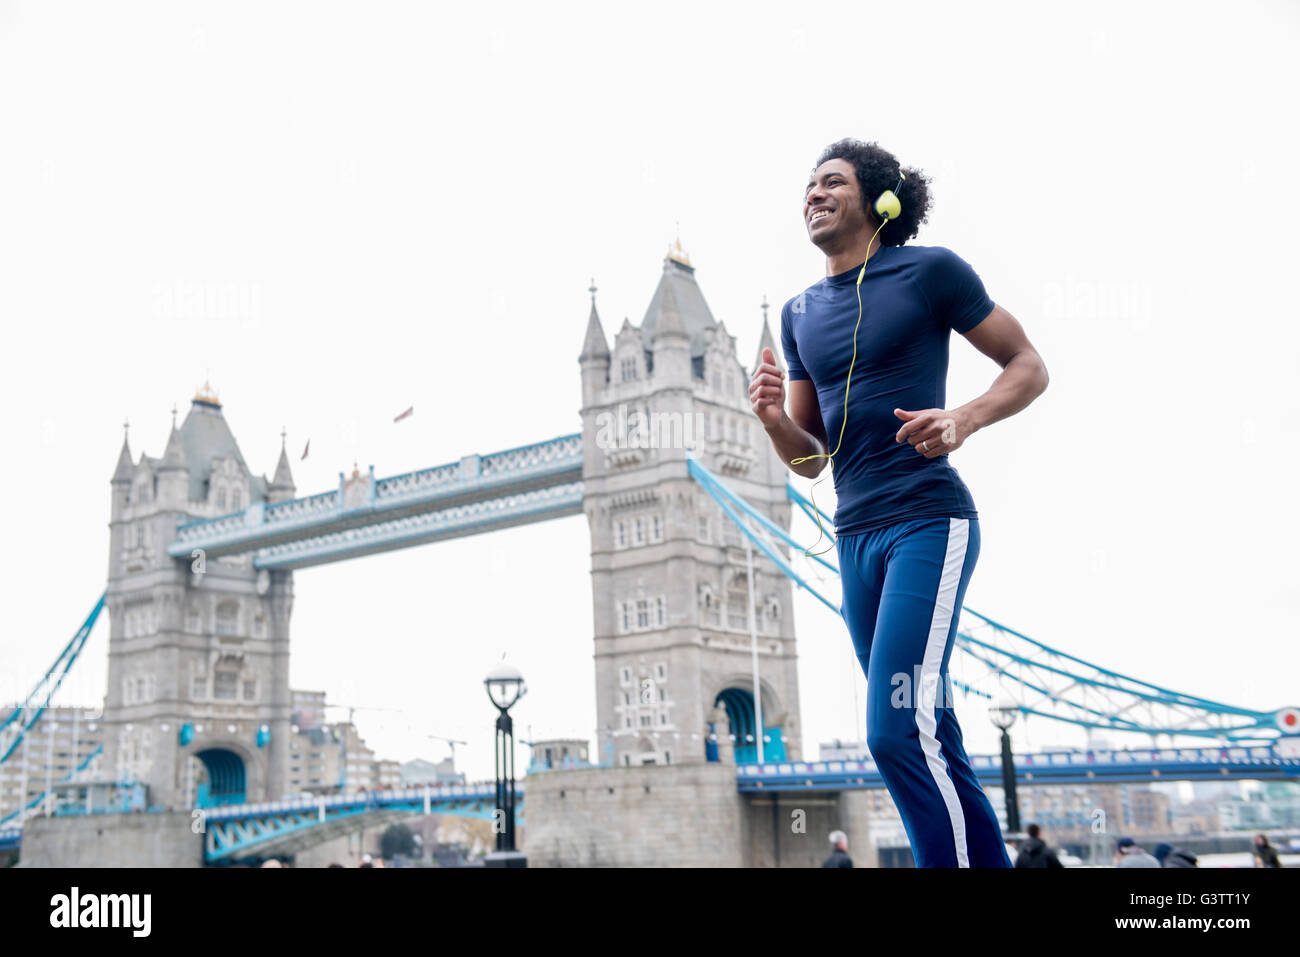 A young man jogging past Tower Bridge in London. Stock Photo